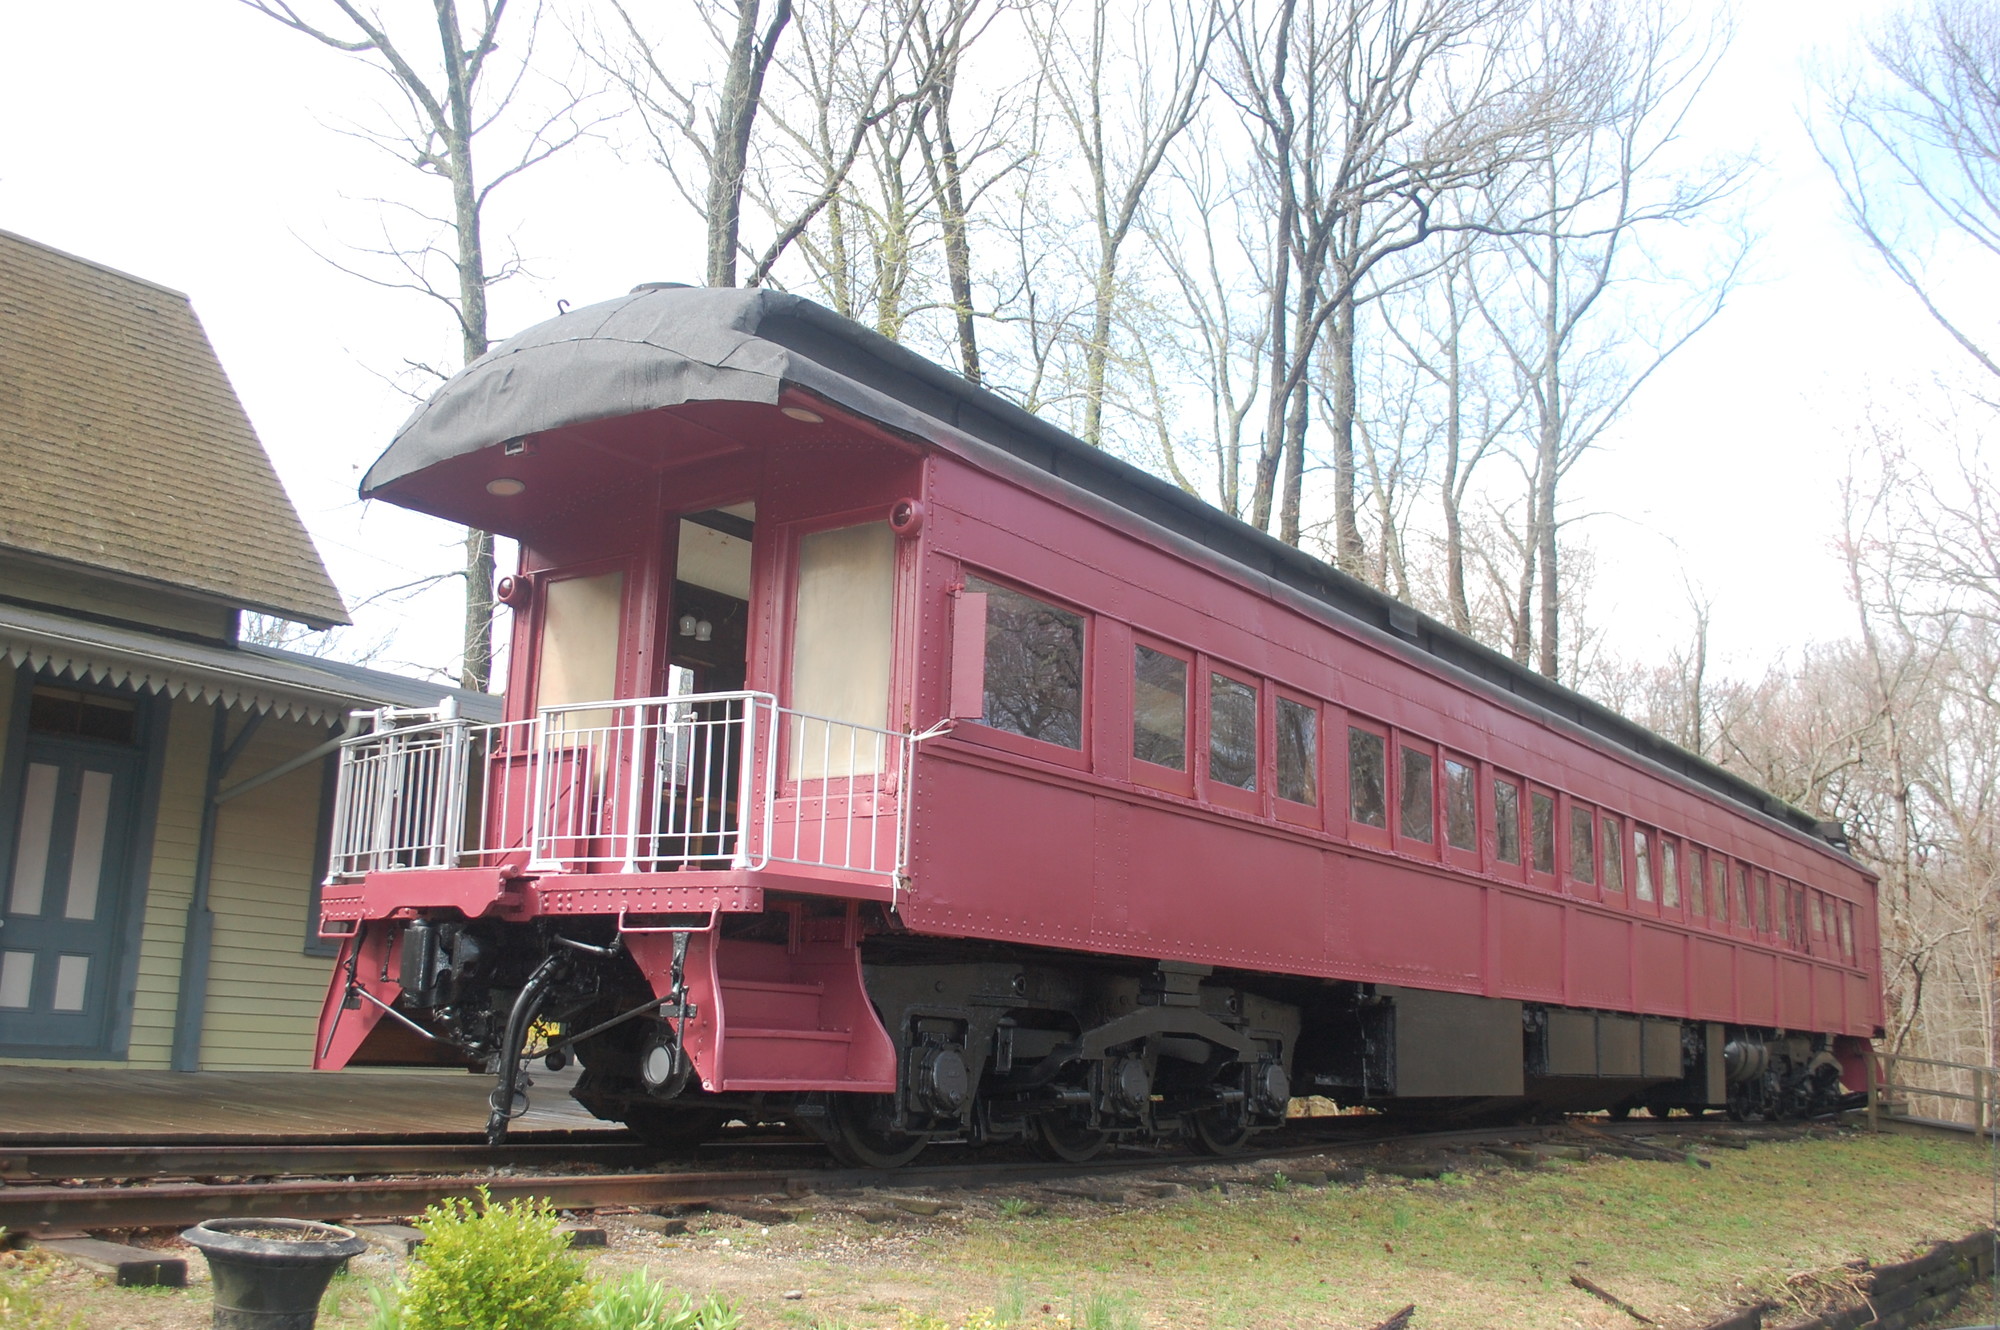 With exterior work done to the outside of the Jamaica parlor car adjacent to the Wantagh Museum, attention will turn this year to restoring the inside.